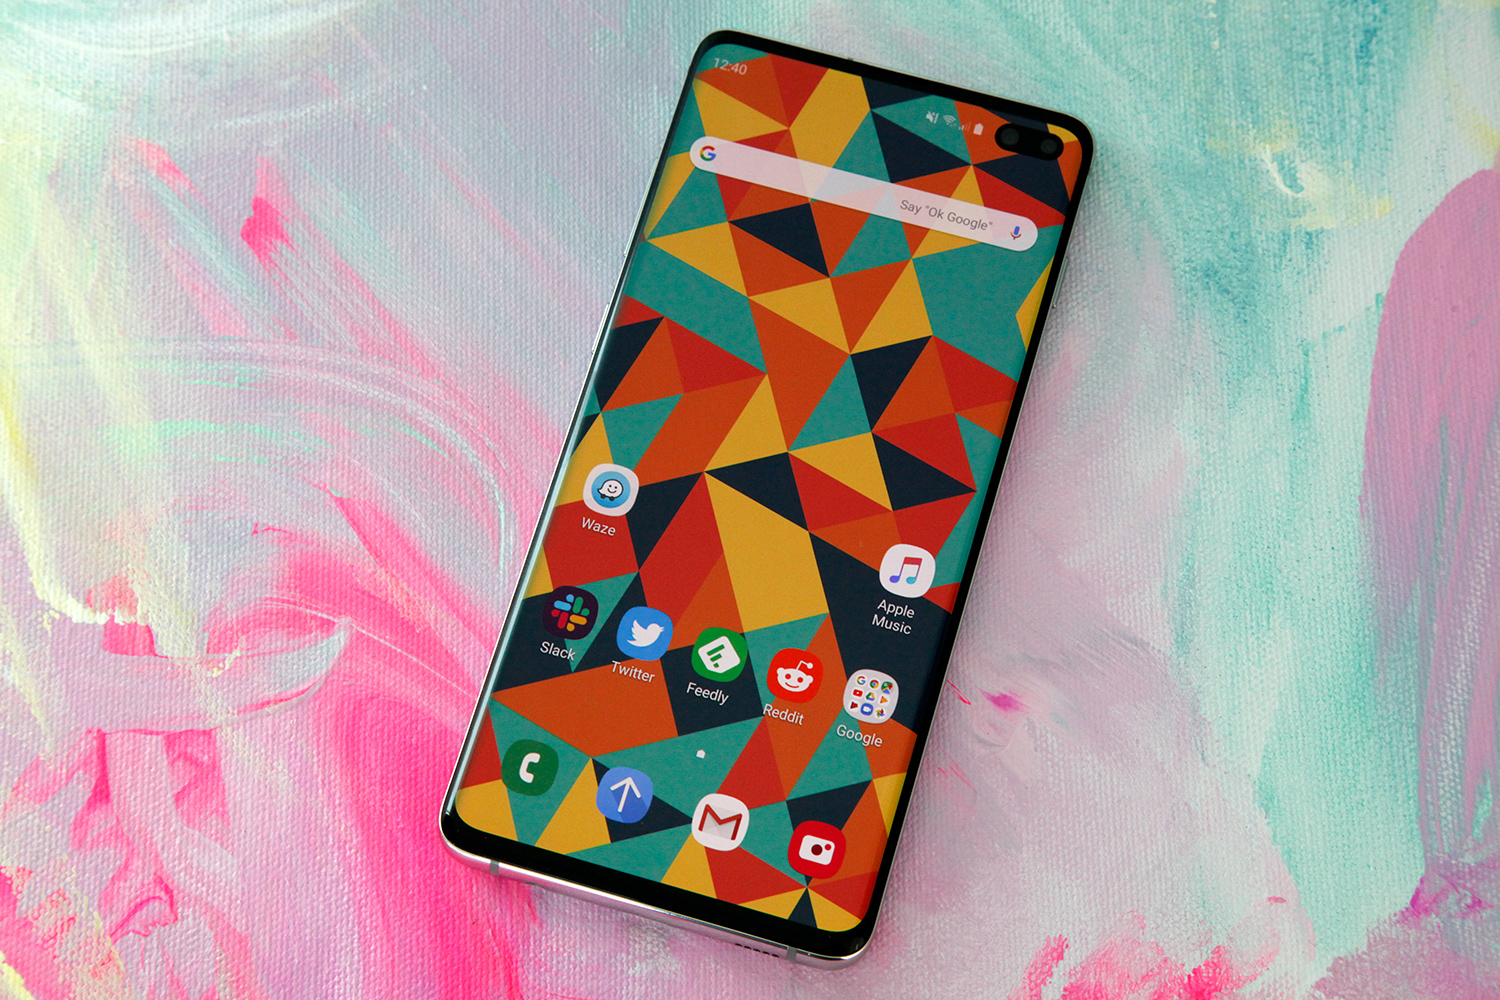 S10 Wallpaper  S10 Plus Wallp  Apps on Google Play